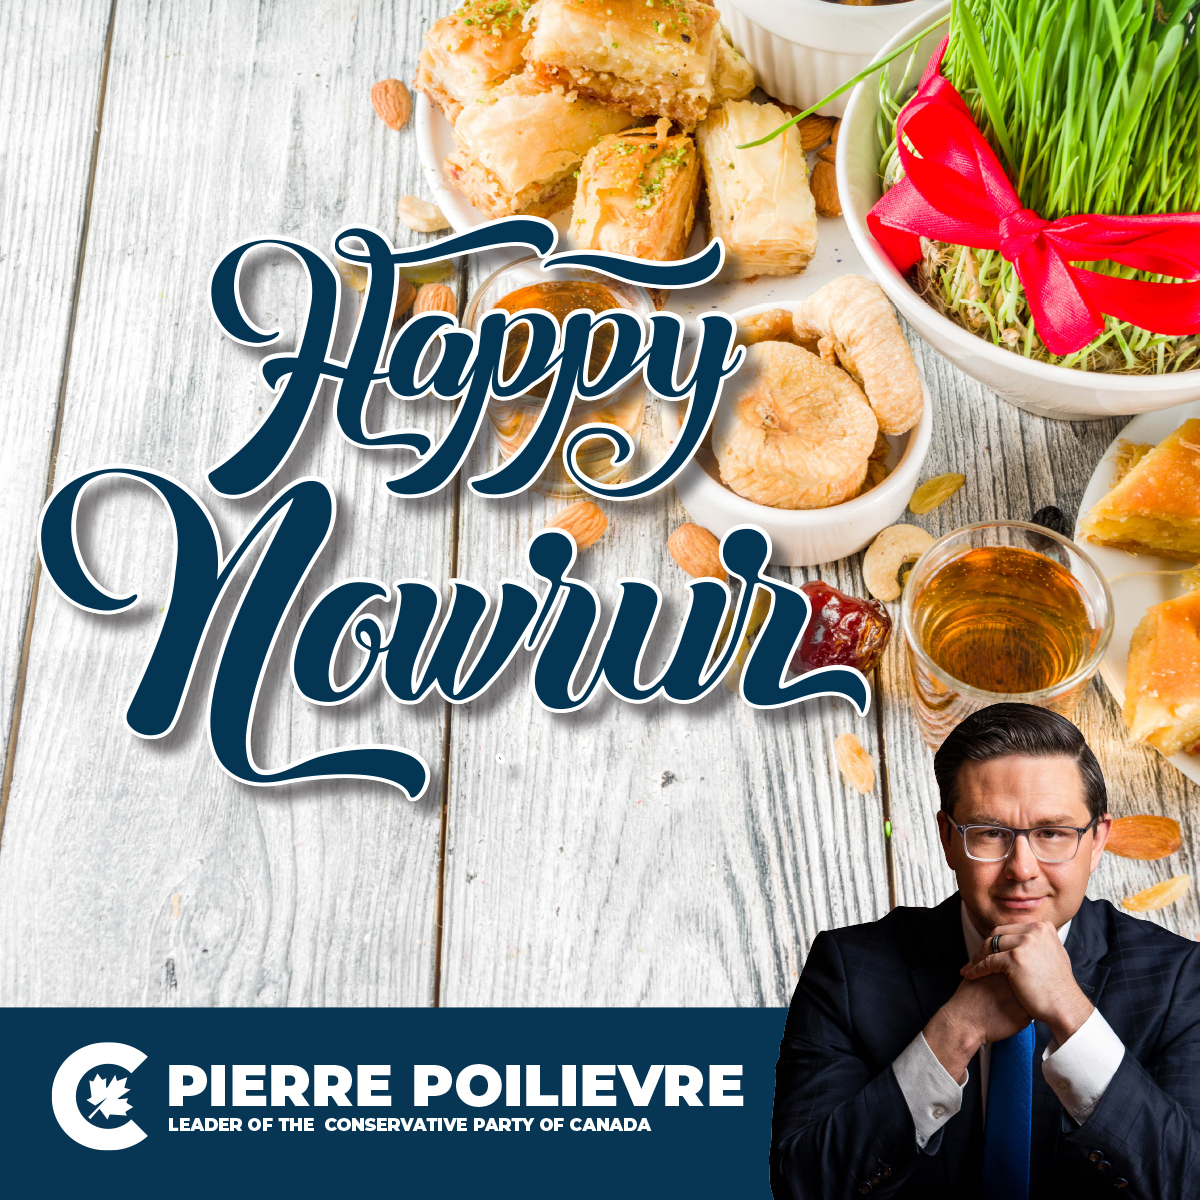 Pierre Poilievre Nowruz 1402 2023 Canada Conservative Party پی‌یر پولیور حزب محافظه‌کار کانادا